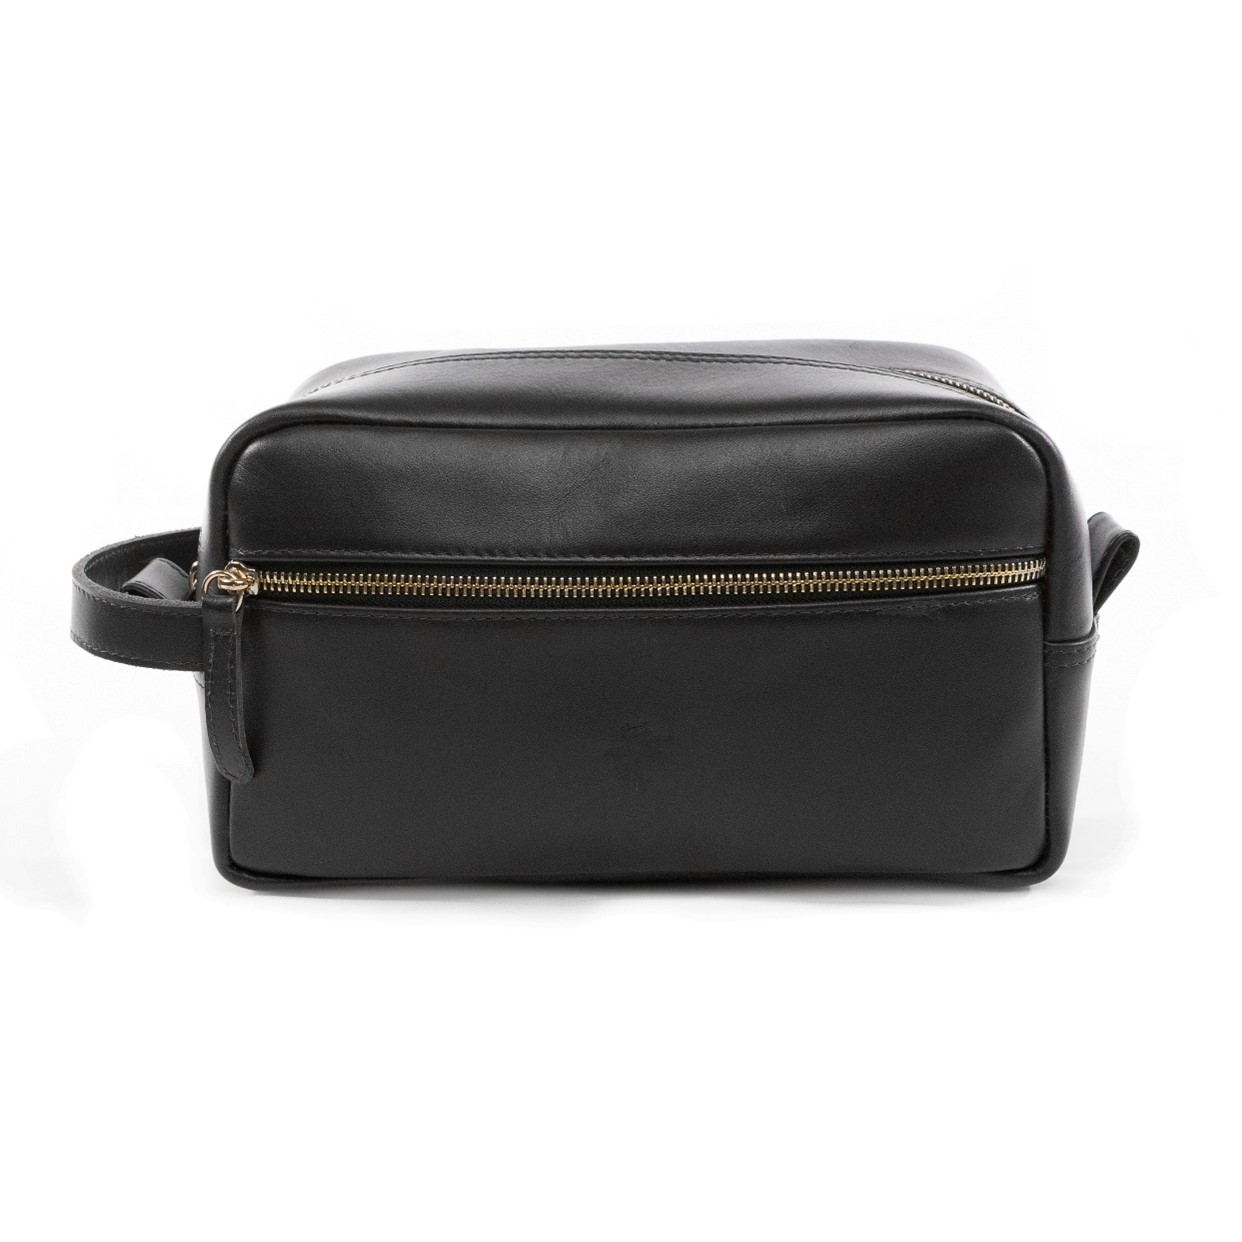 Handmade Black Leather Wash Bag | The Toiletry Bag | The Banneret